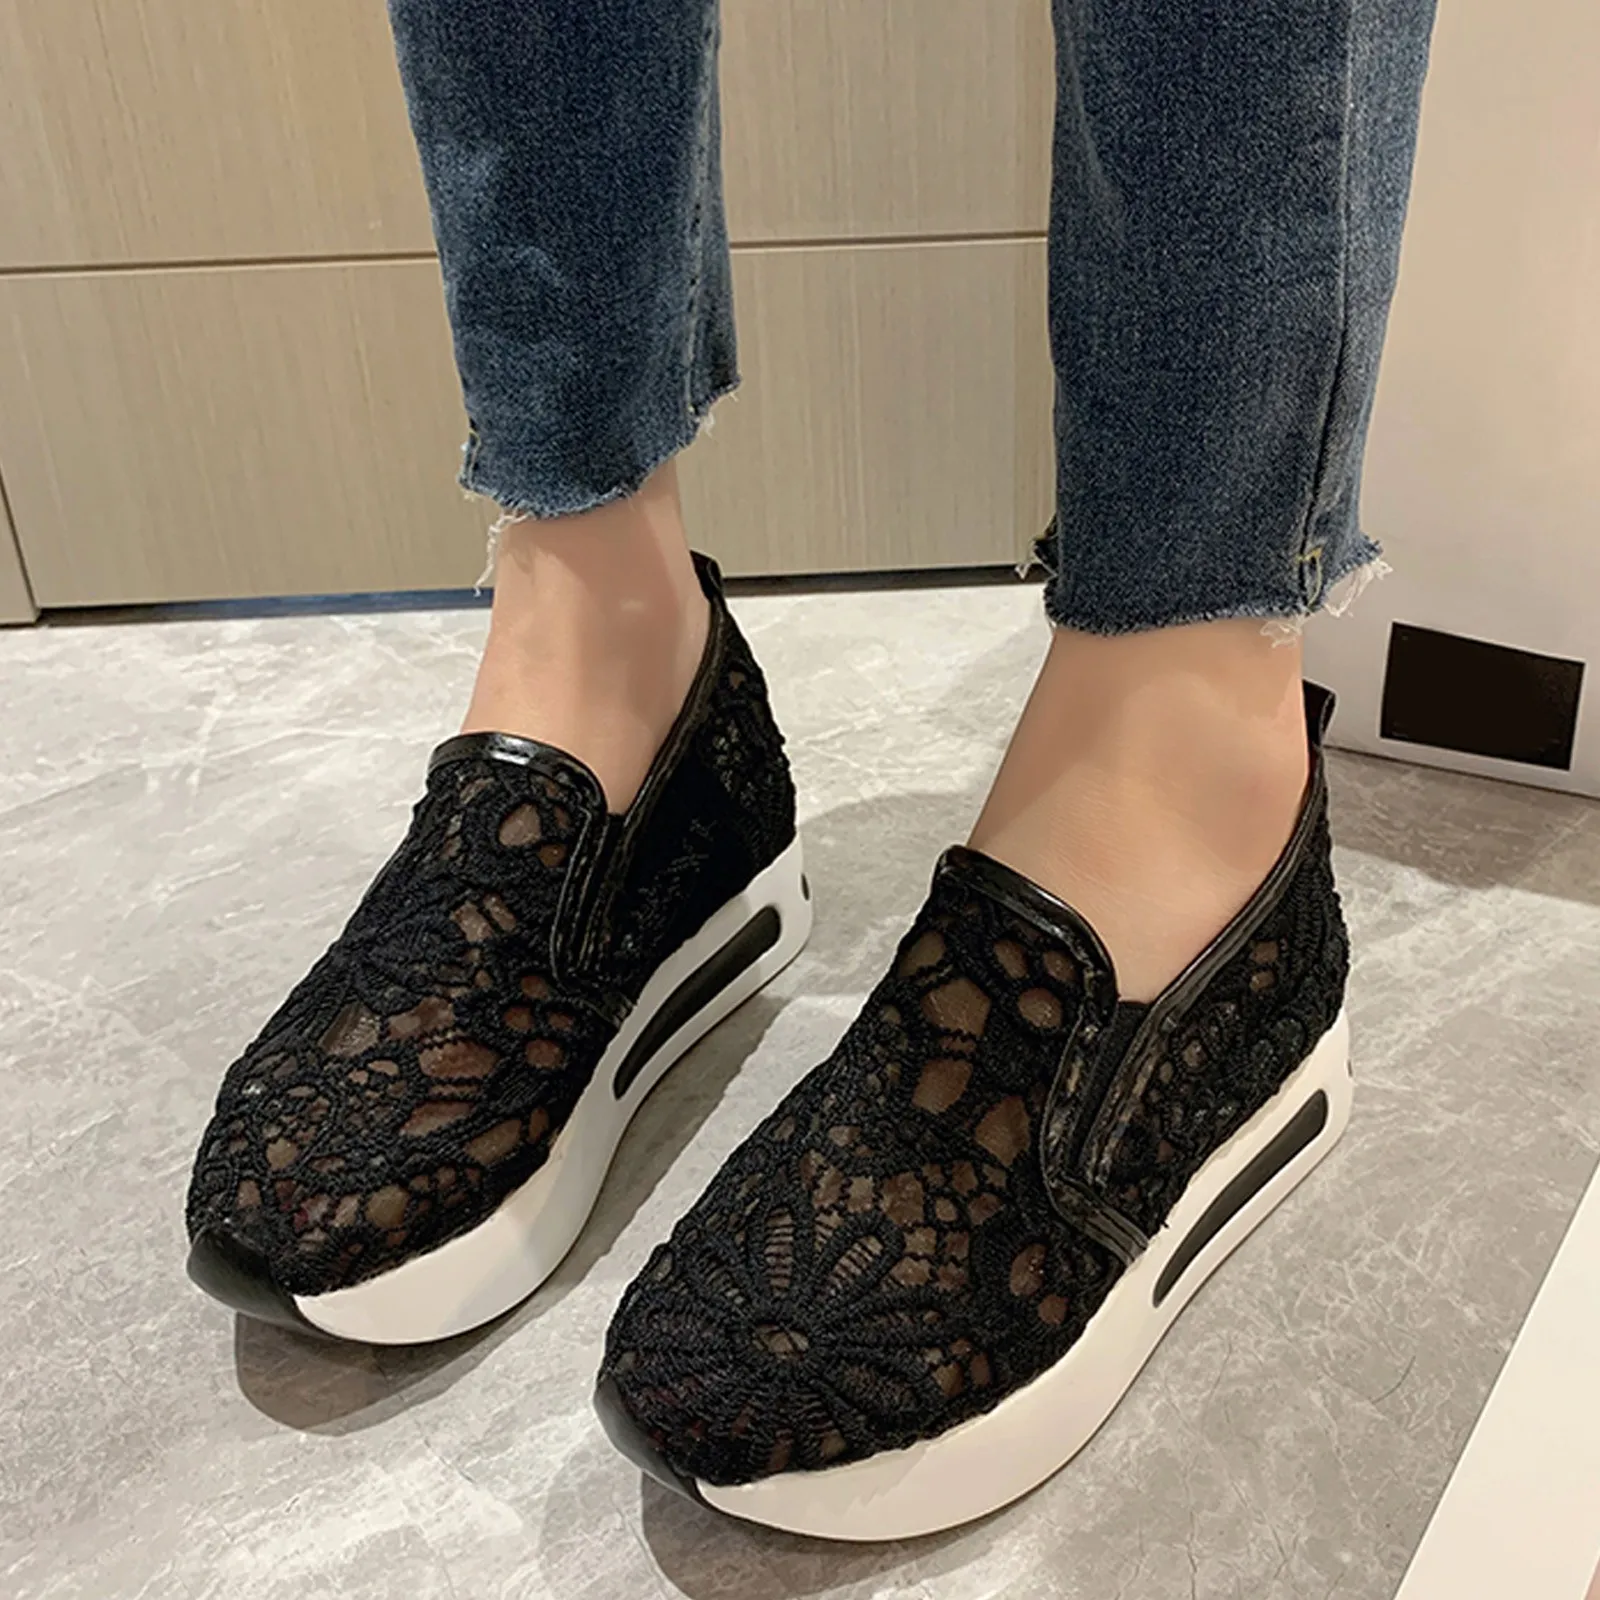 

Platform Wedges women's Sneakers Floral Embroidery Lace Mesh Sneakers For Women Slip On Casual Comfy Heeled Shoes Woman White